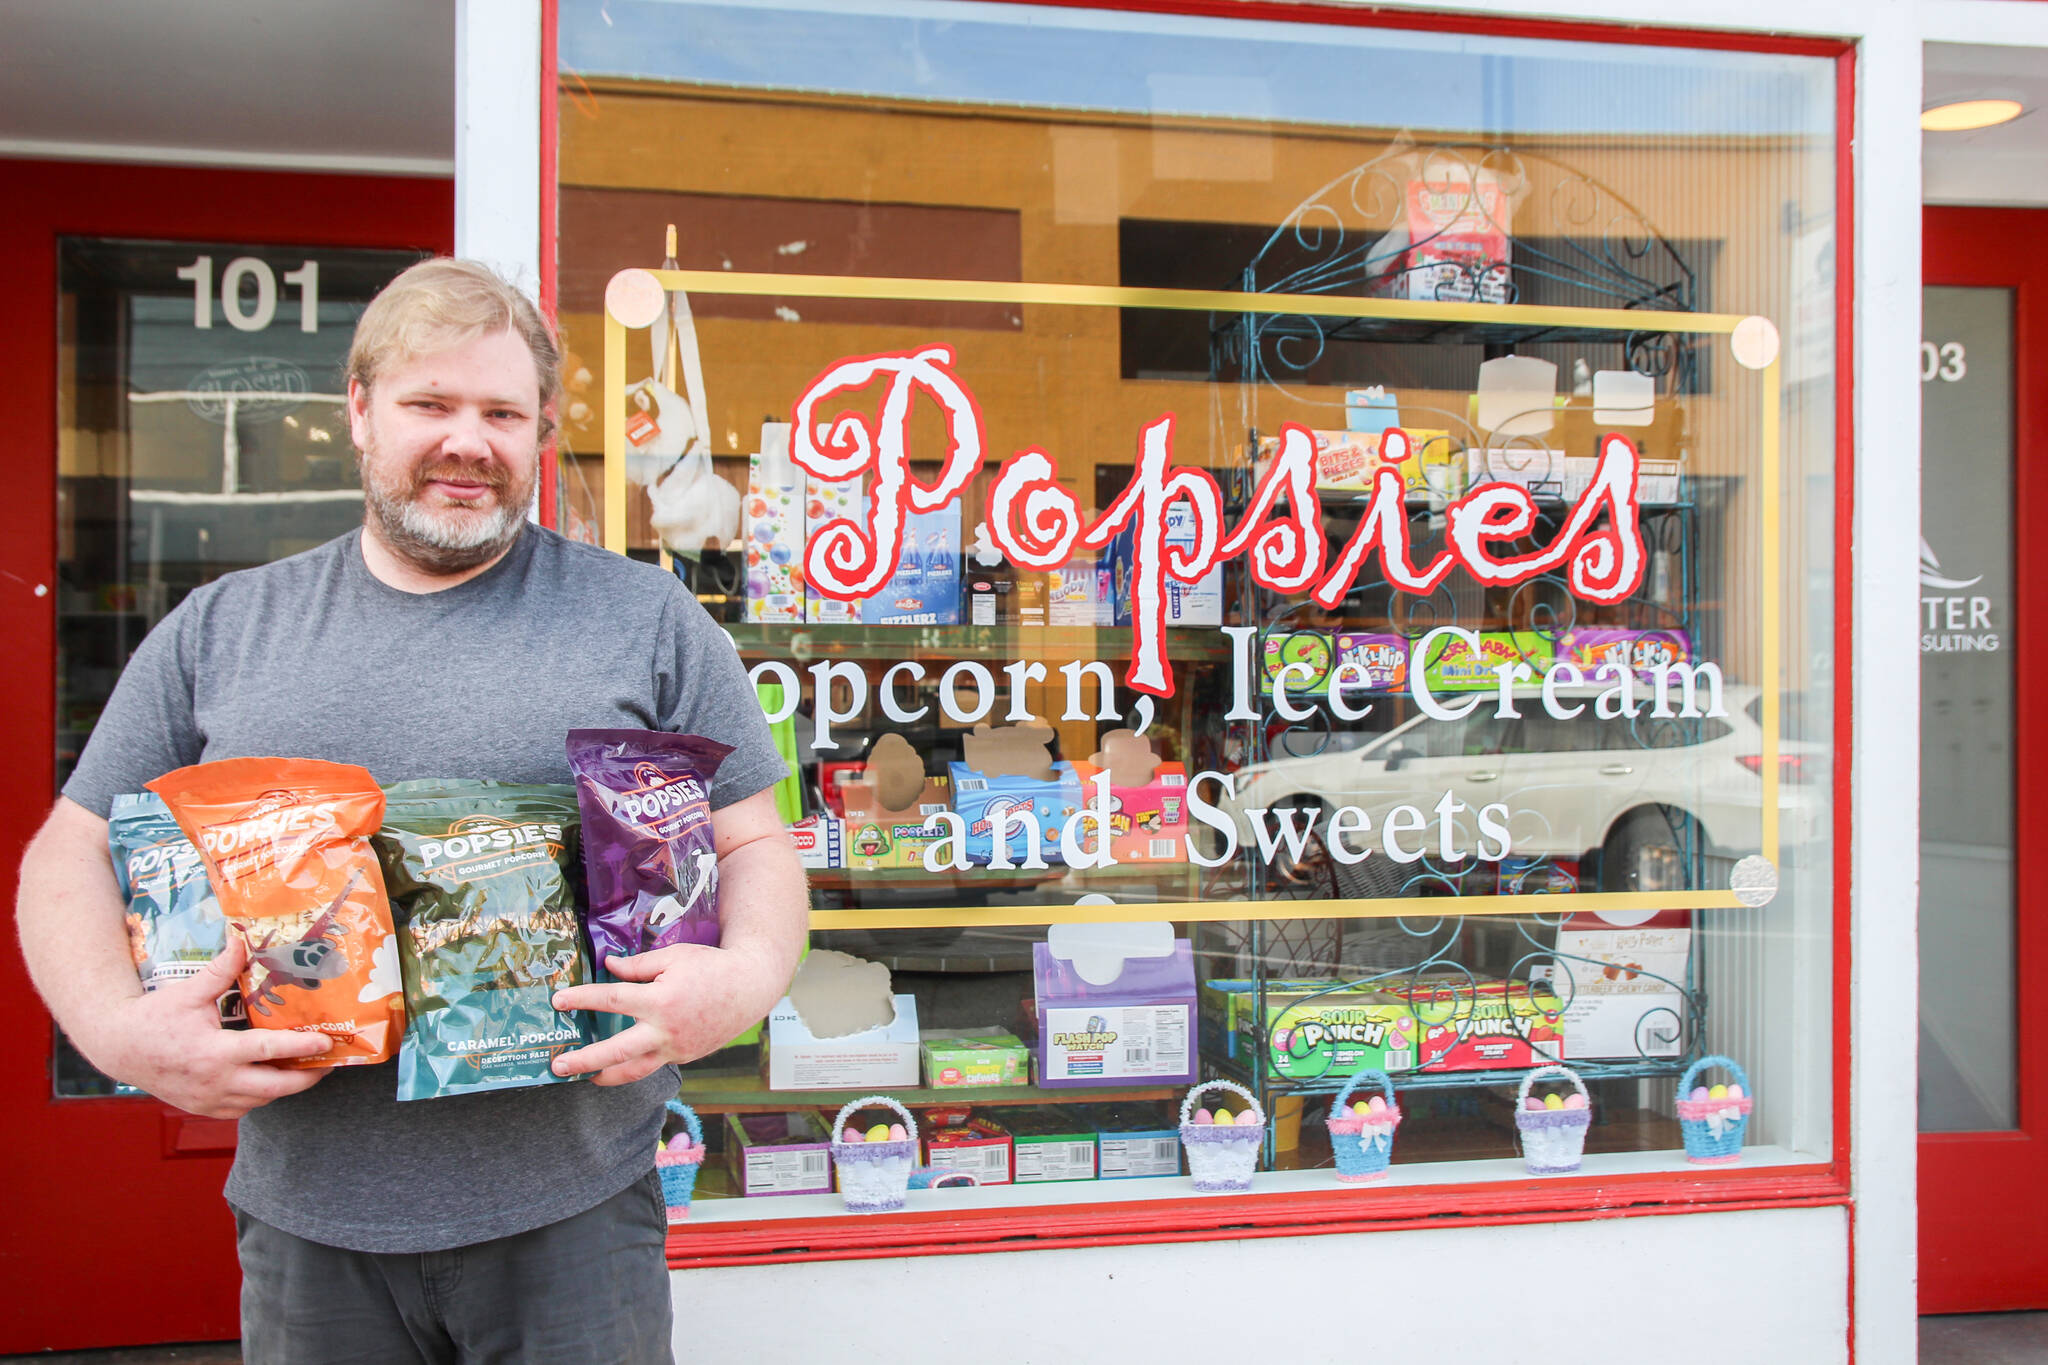 Andy Plumlee stands in front of Popsies, a sweet treats store in downtown Oak Harbor, while holding bags of flavored popcorn.